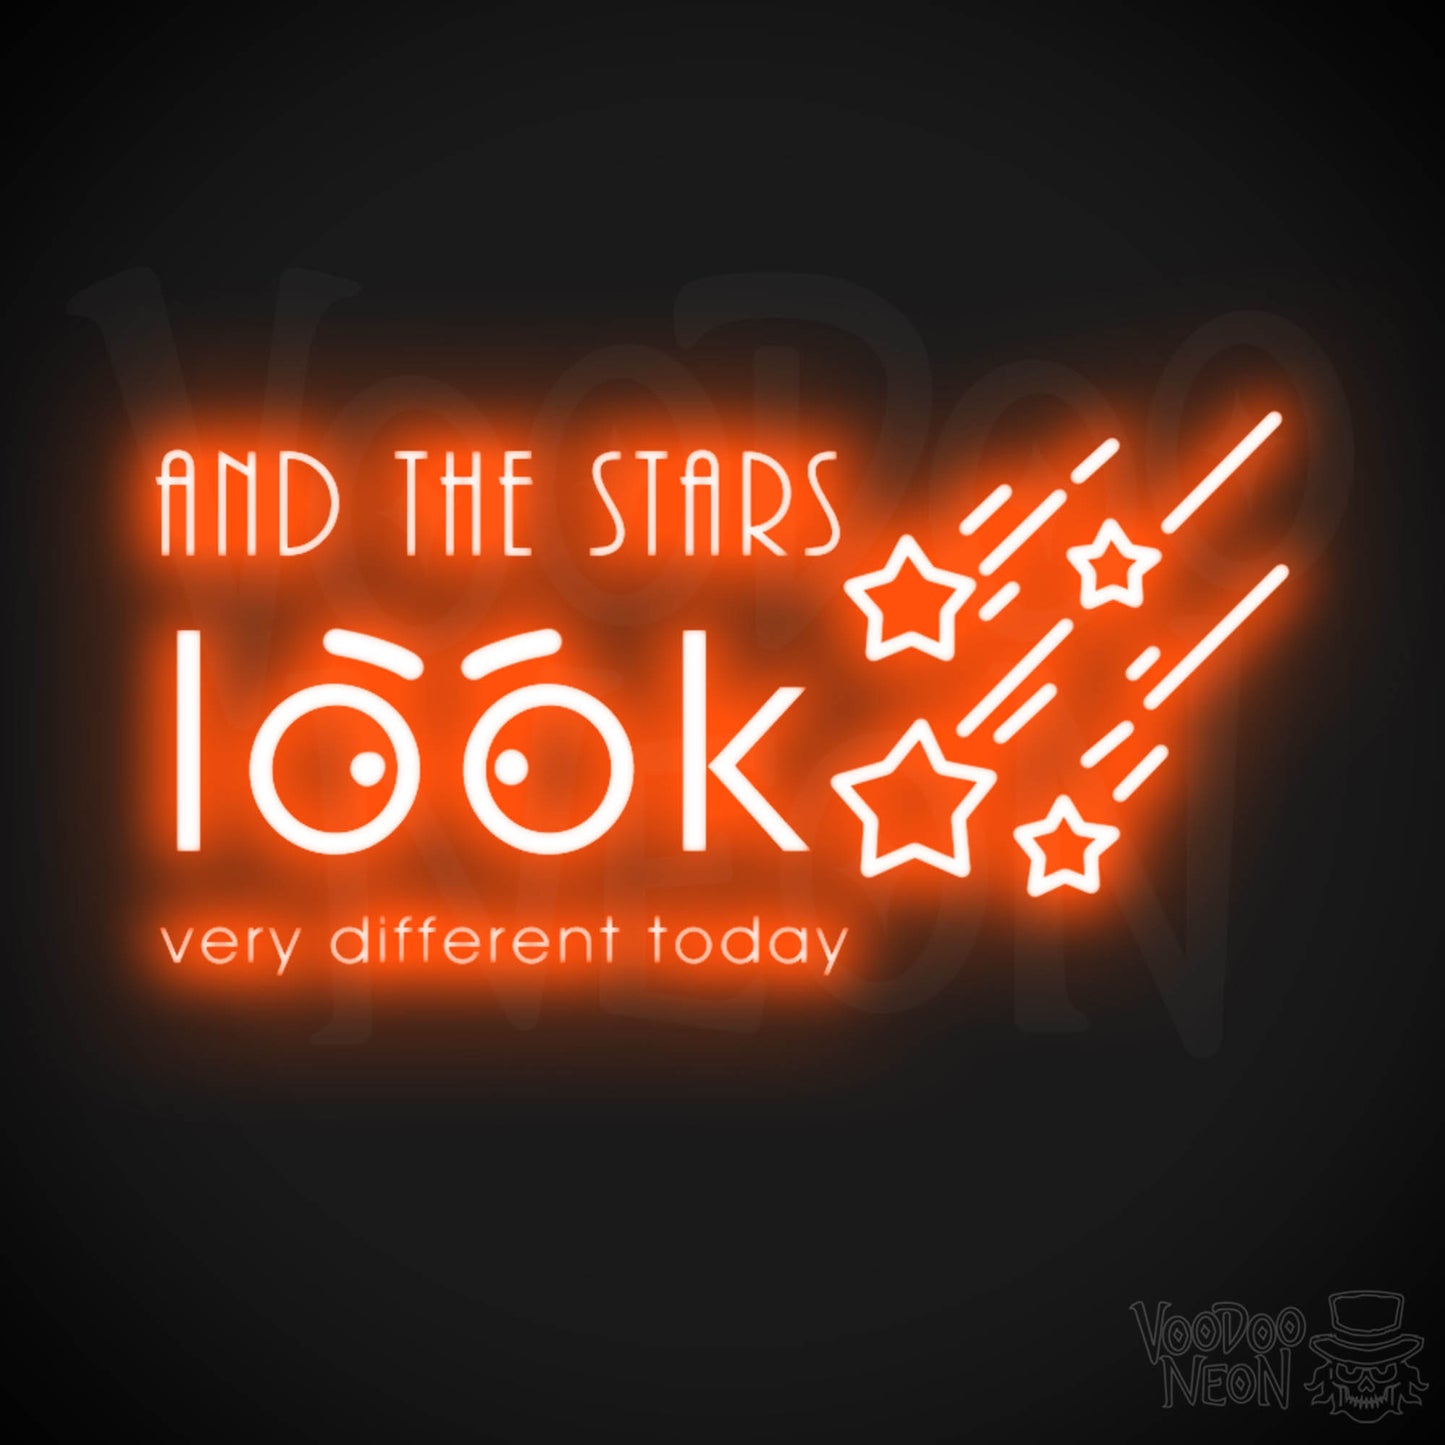 And the Stars Look Very Different Today Neon Sign - LED Wall Art - Color Orange